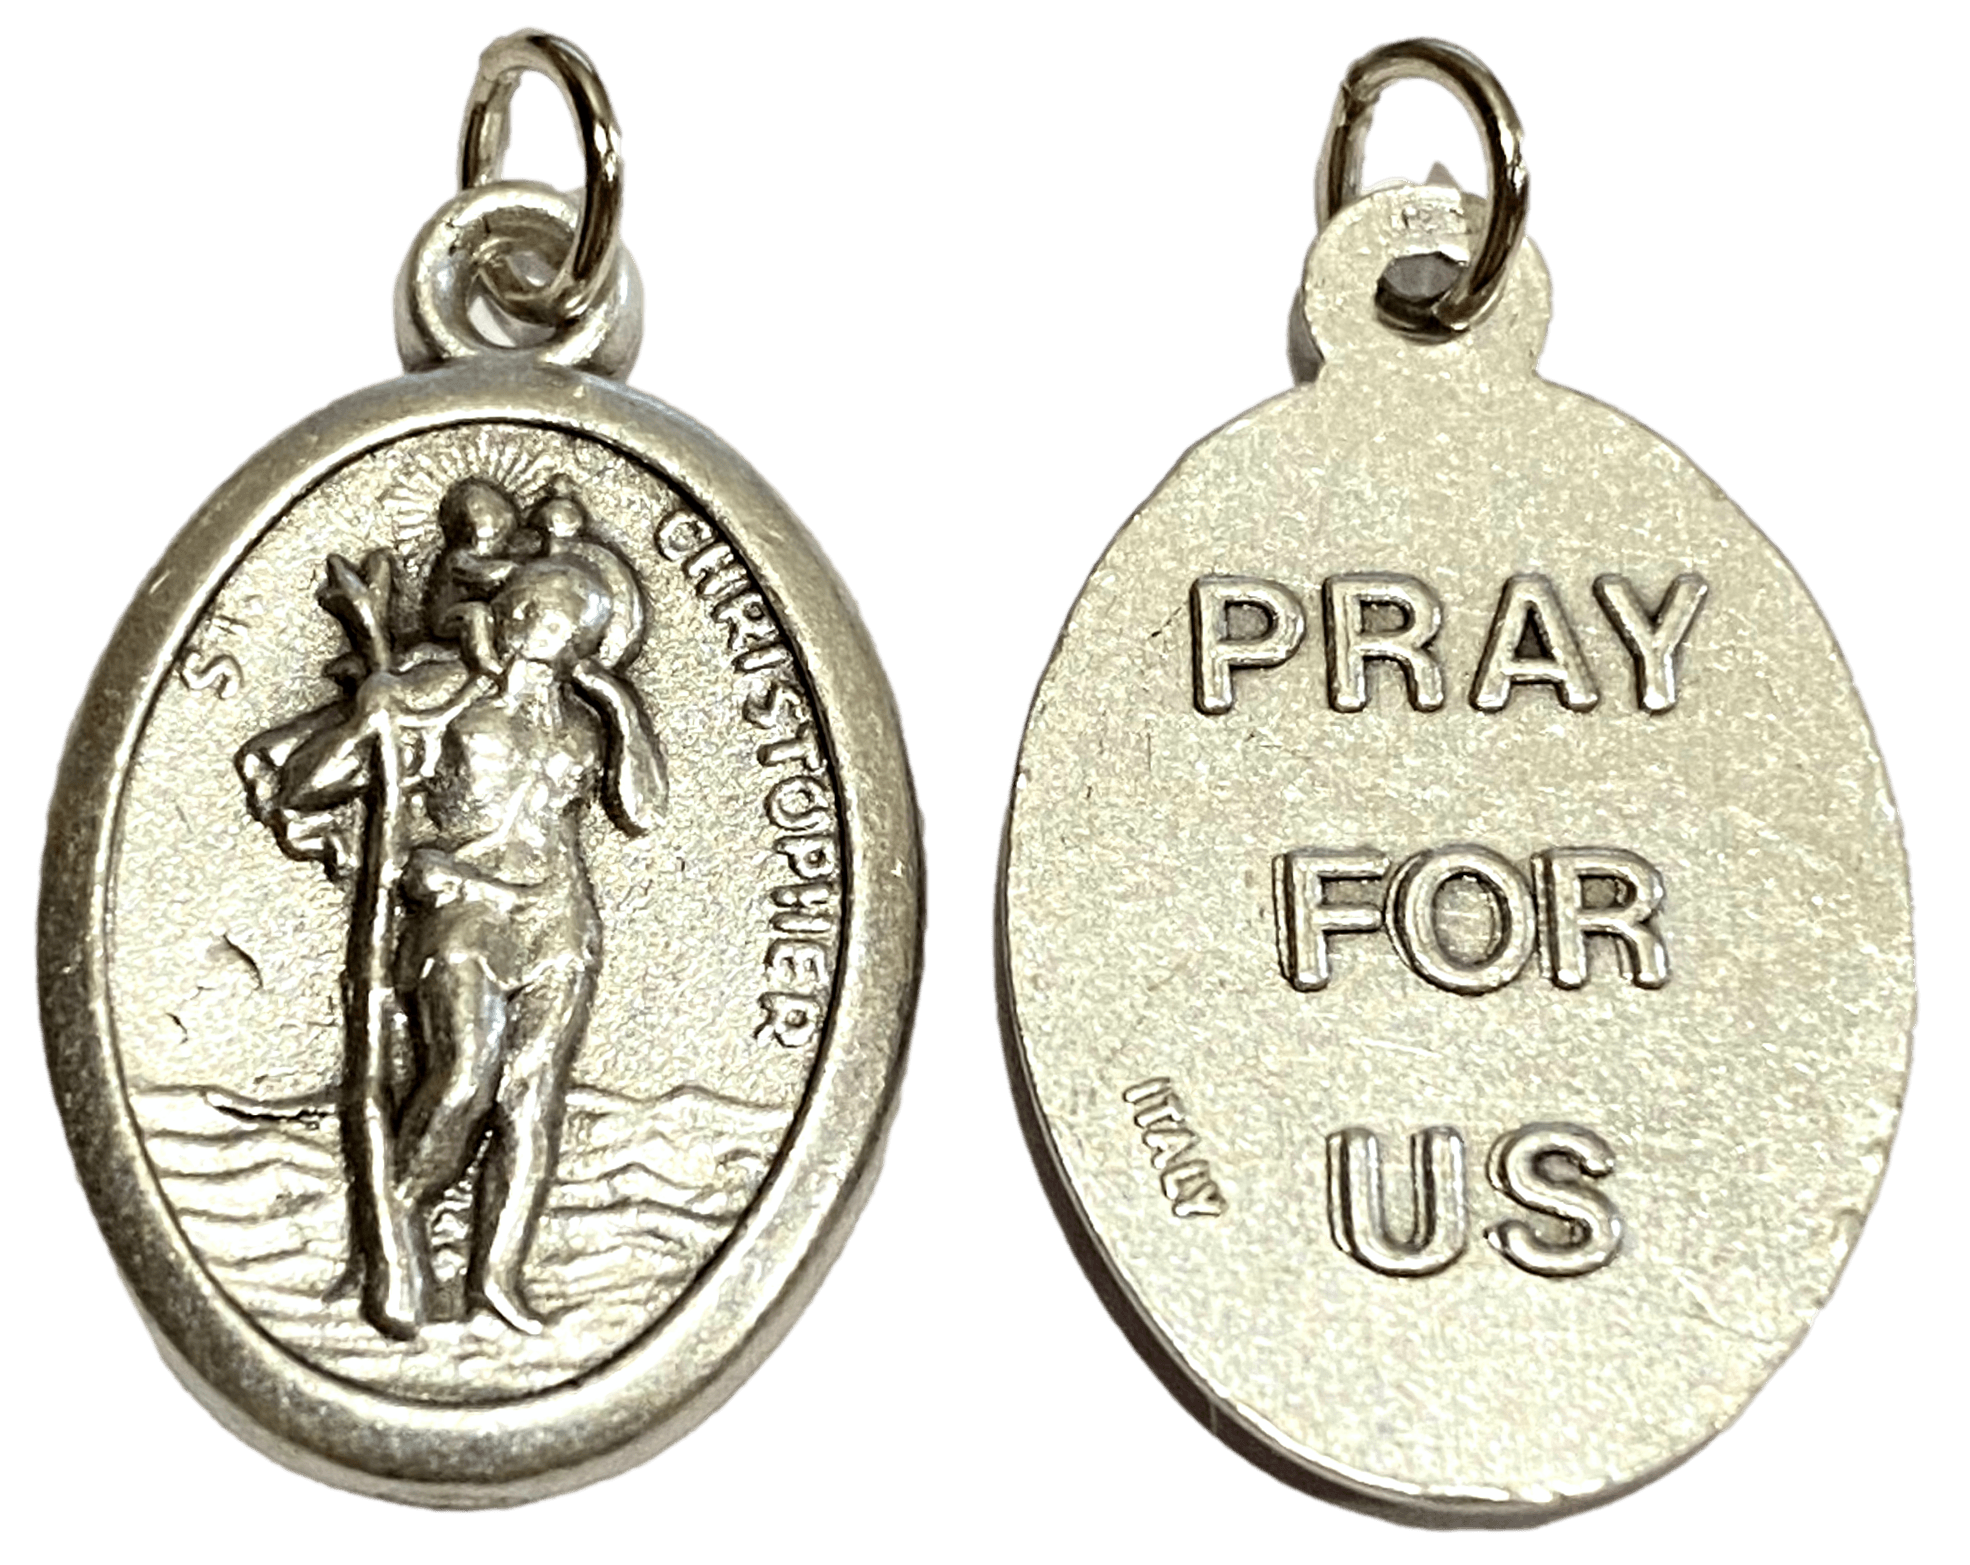 Medal Saint Christopher Pray For Us Italian Double-Sided Silver Oxidized Metal Alloy 1 inch - Ysleta Mission Gift Shop- VOTED El Paso's Best Gift Shop